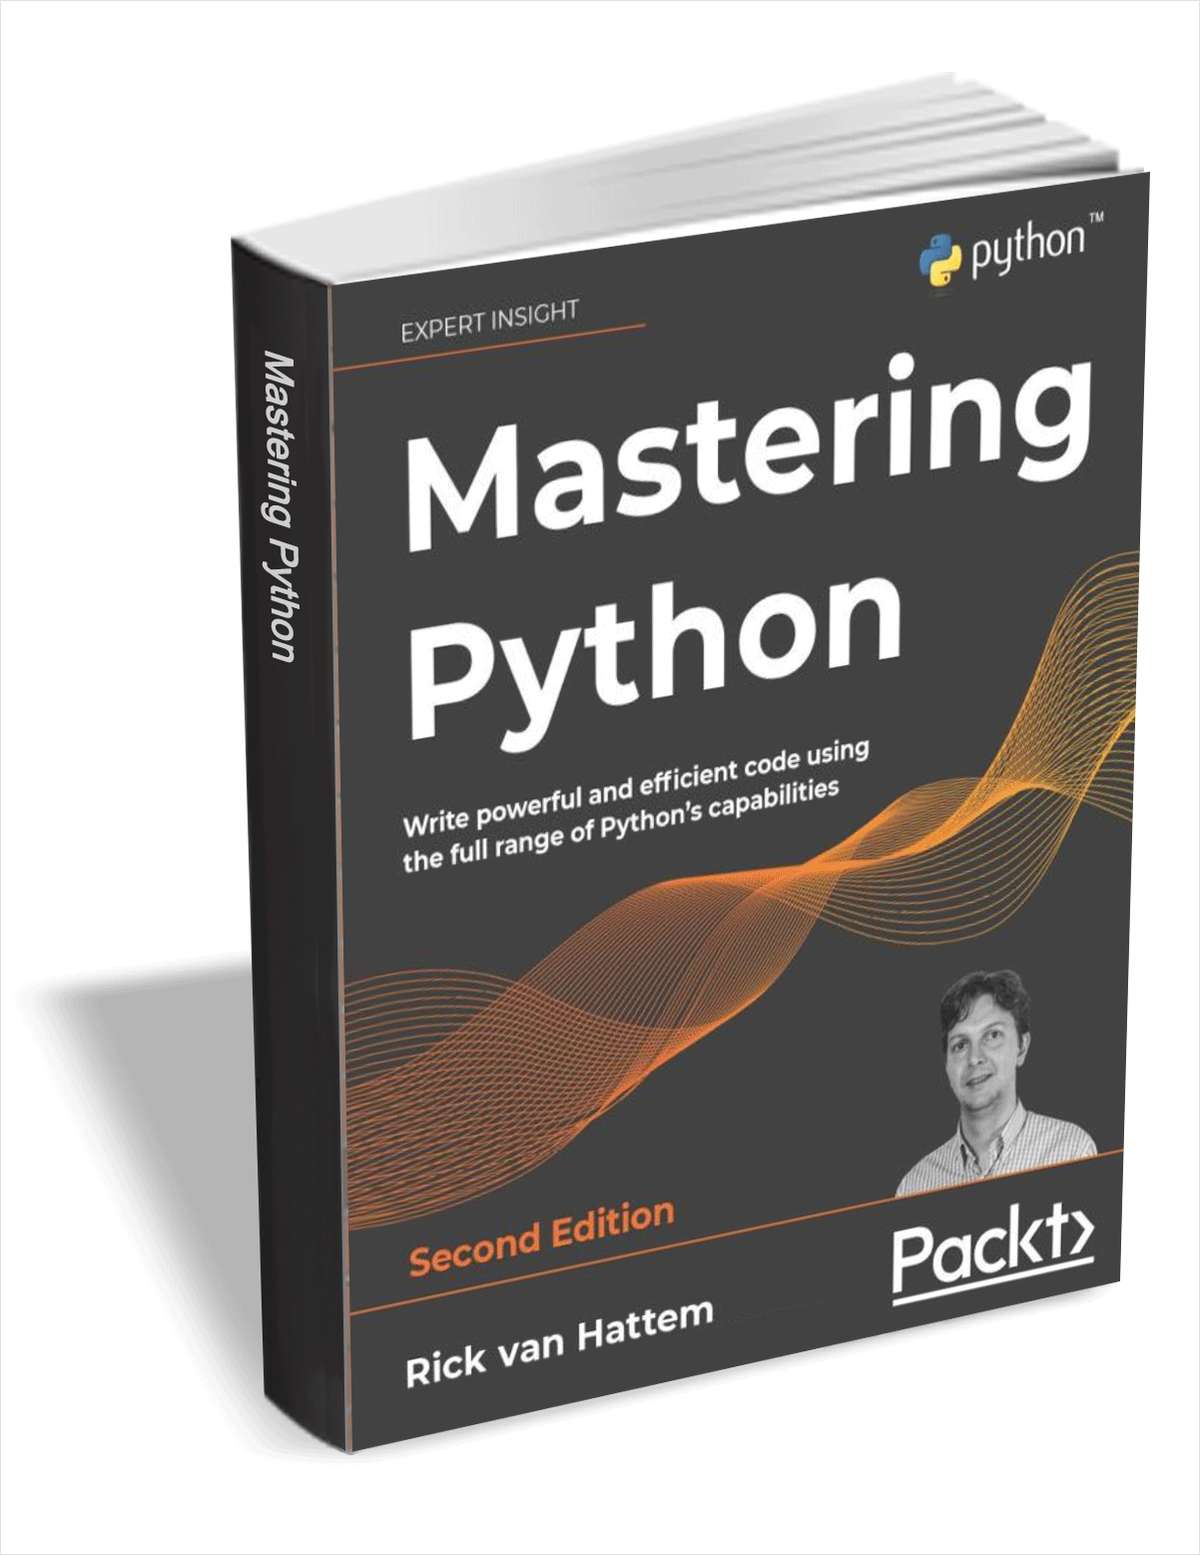 Mastering Python - Second Edition ($35.99 Value) Free for a Limited Time